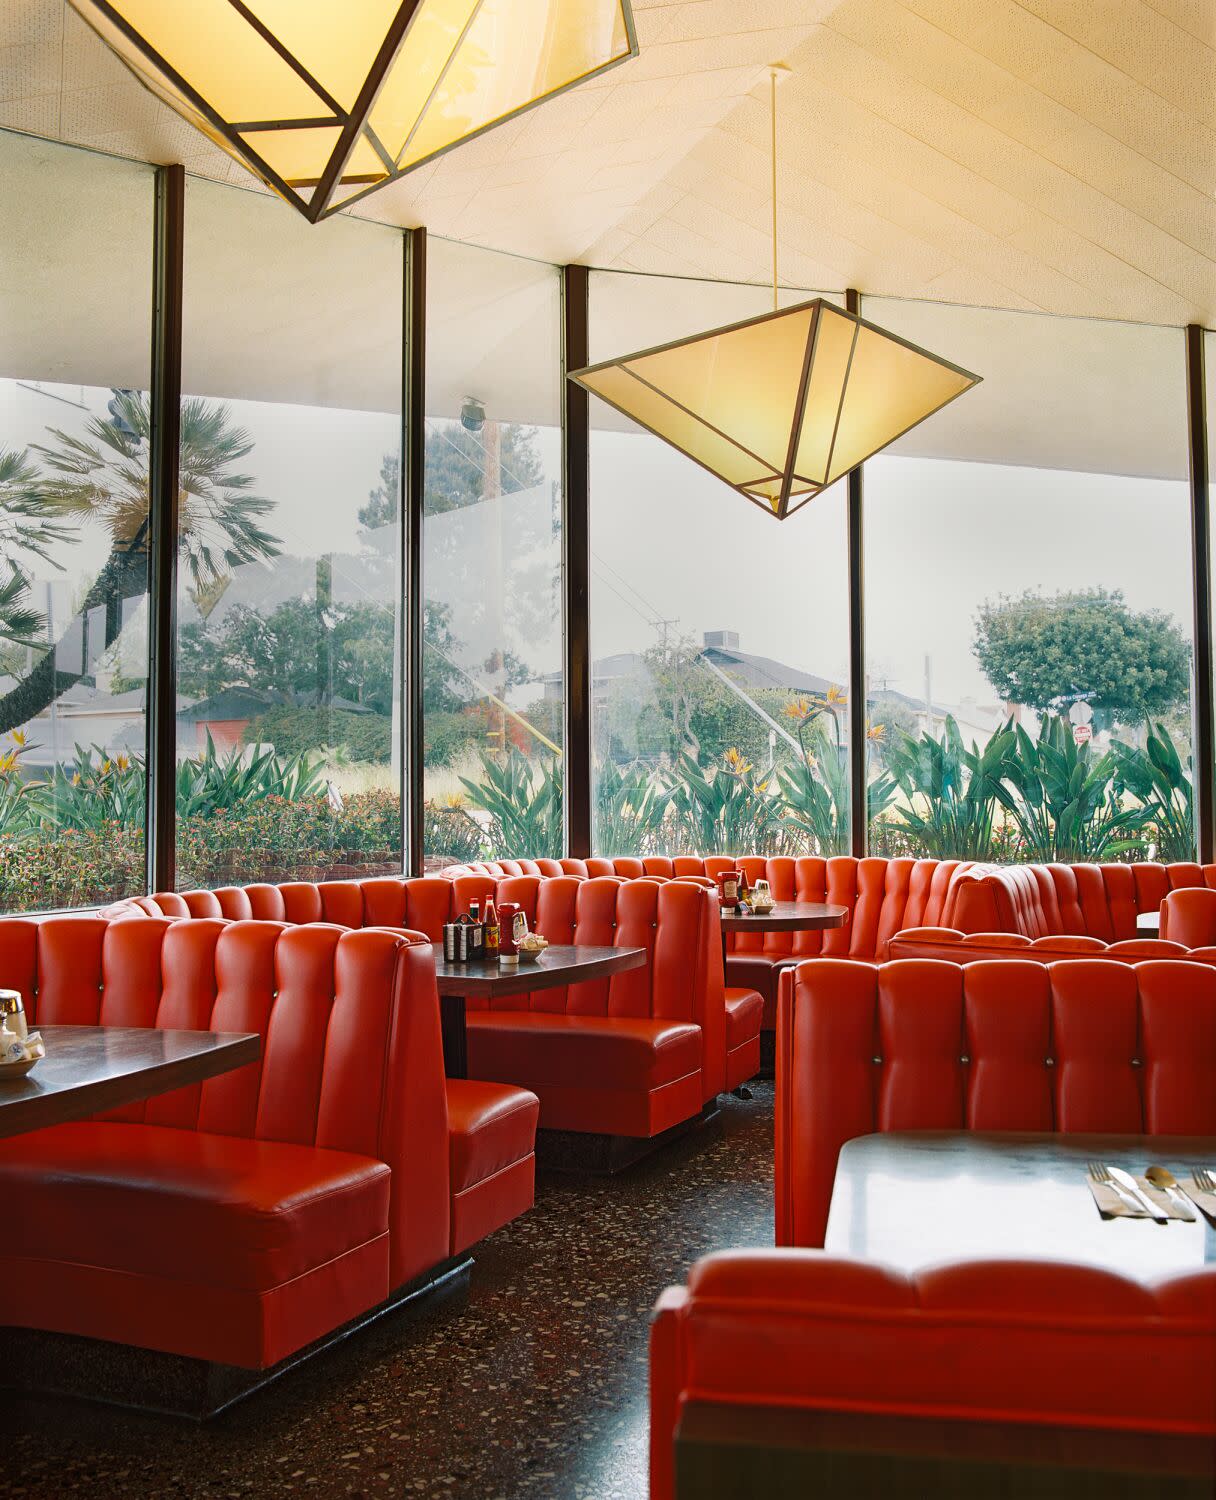 A photograph of the bright red booths at Pann's Restaurants, floor-to-ceiling glass windows.